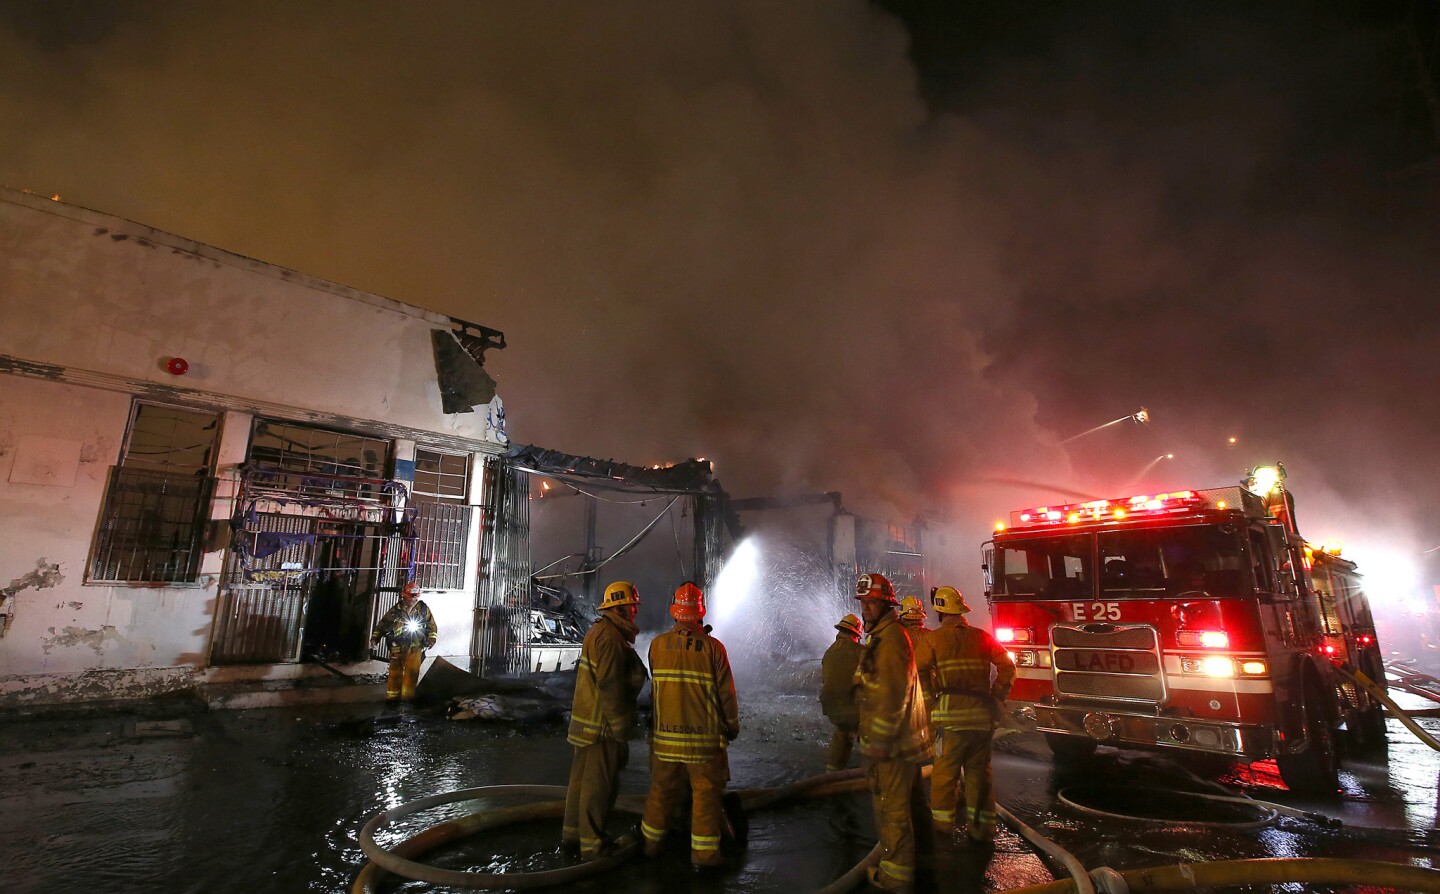 Firefighters confer during their battle against the blaze at a a commercial building near the intersection of Soto Street and Olympic Bouevard in Boyle Heights.